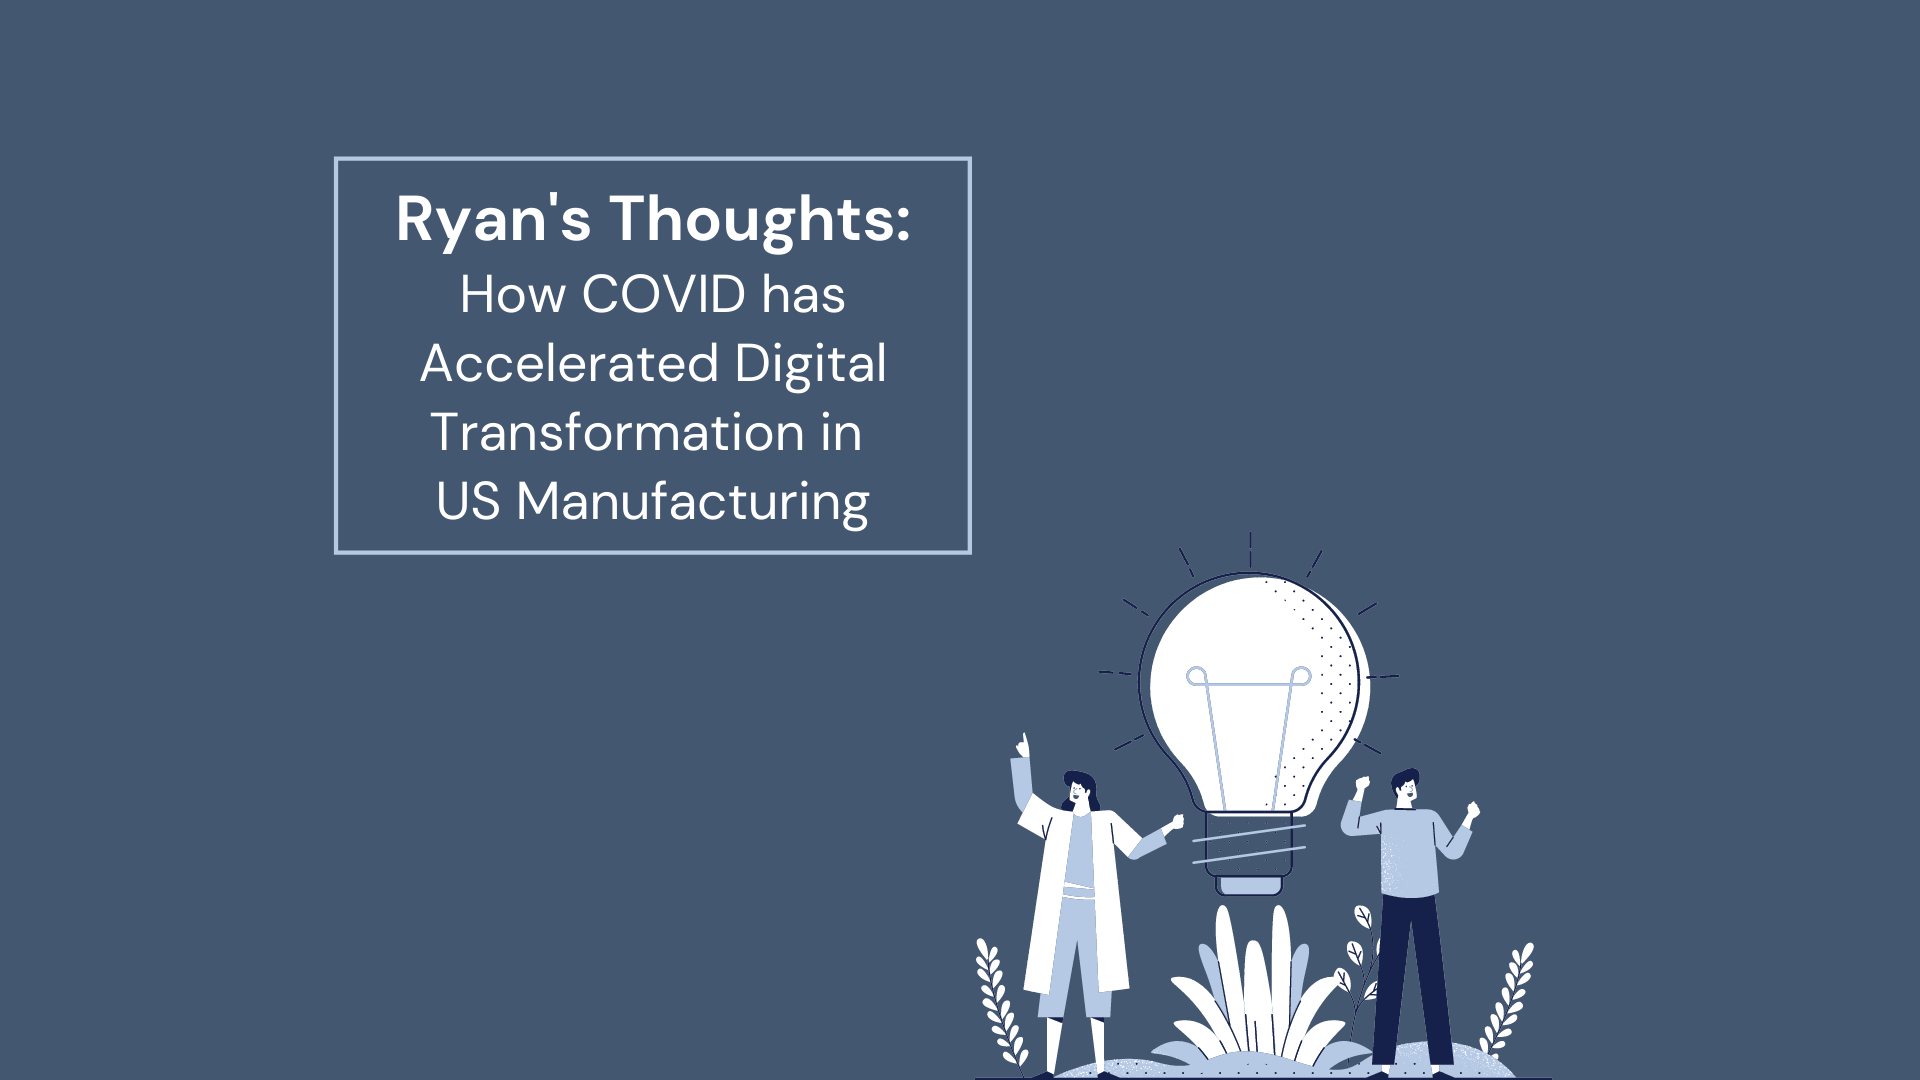 Ryan's Thoughts: How COVID has Accelerated Digital Transformation in US Manufacturing